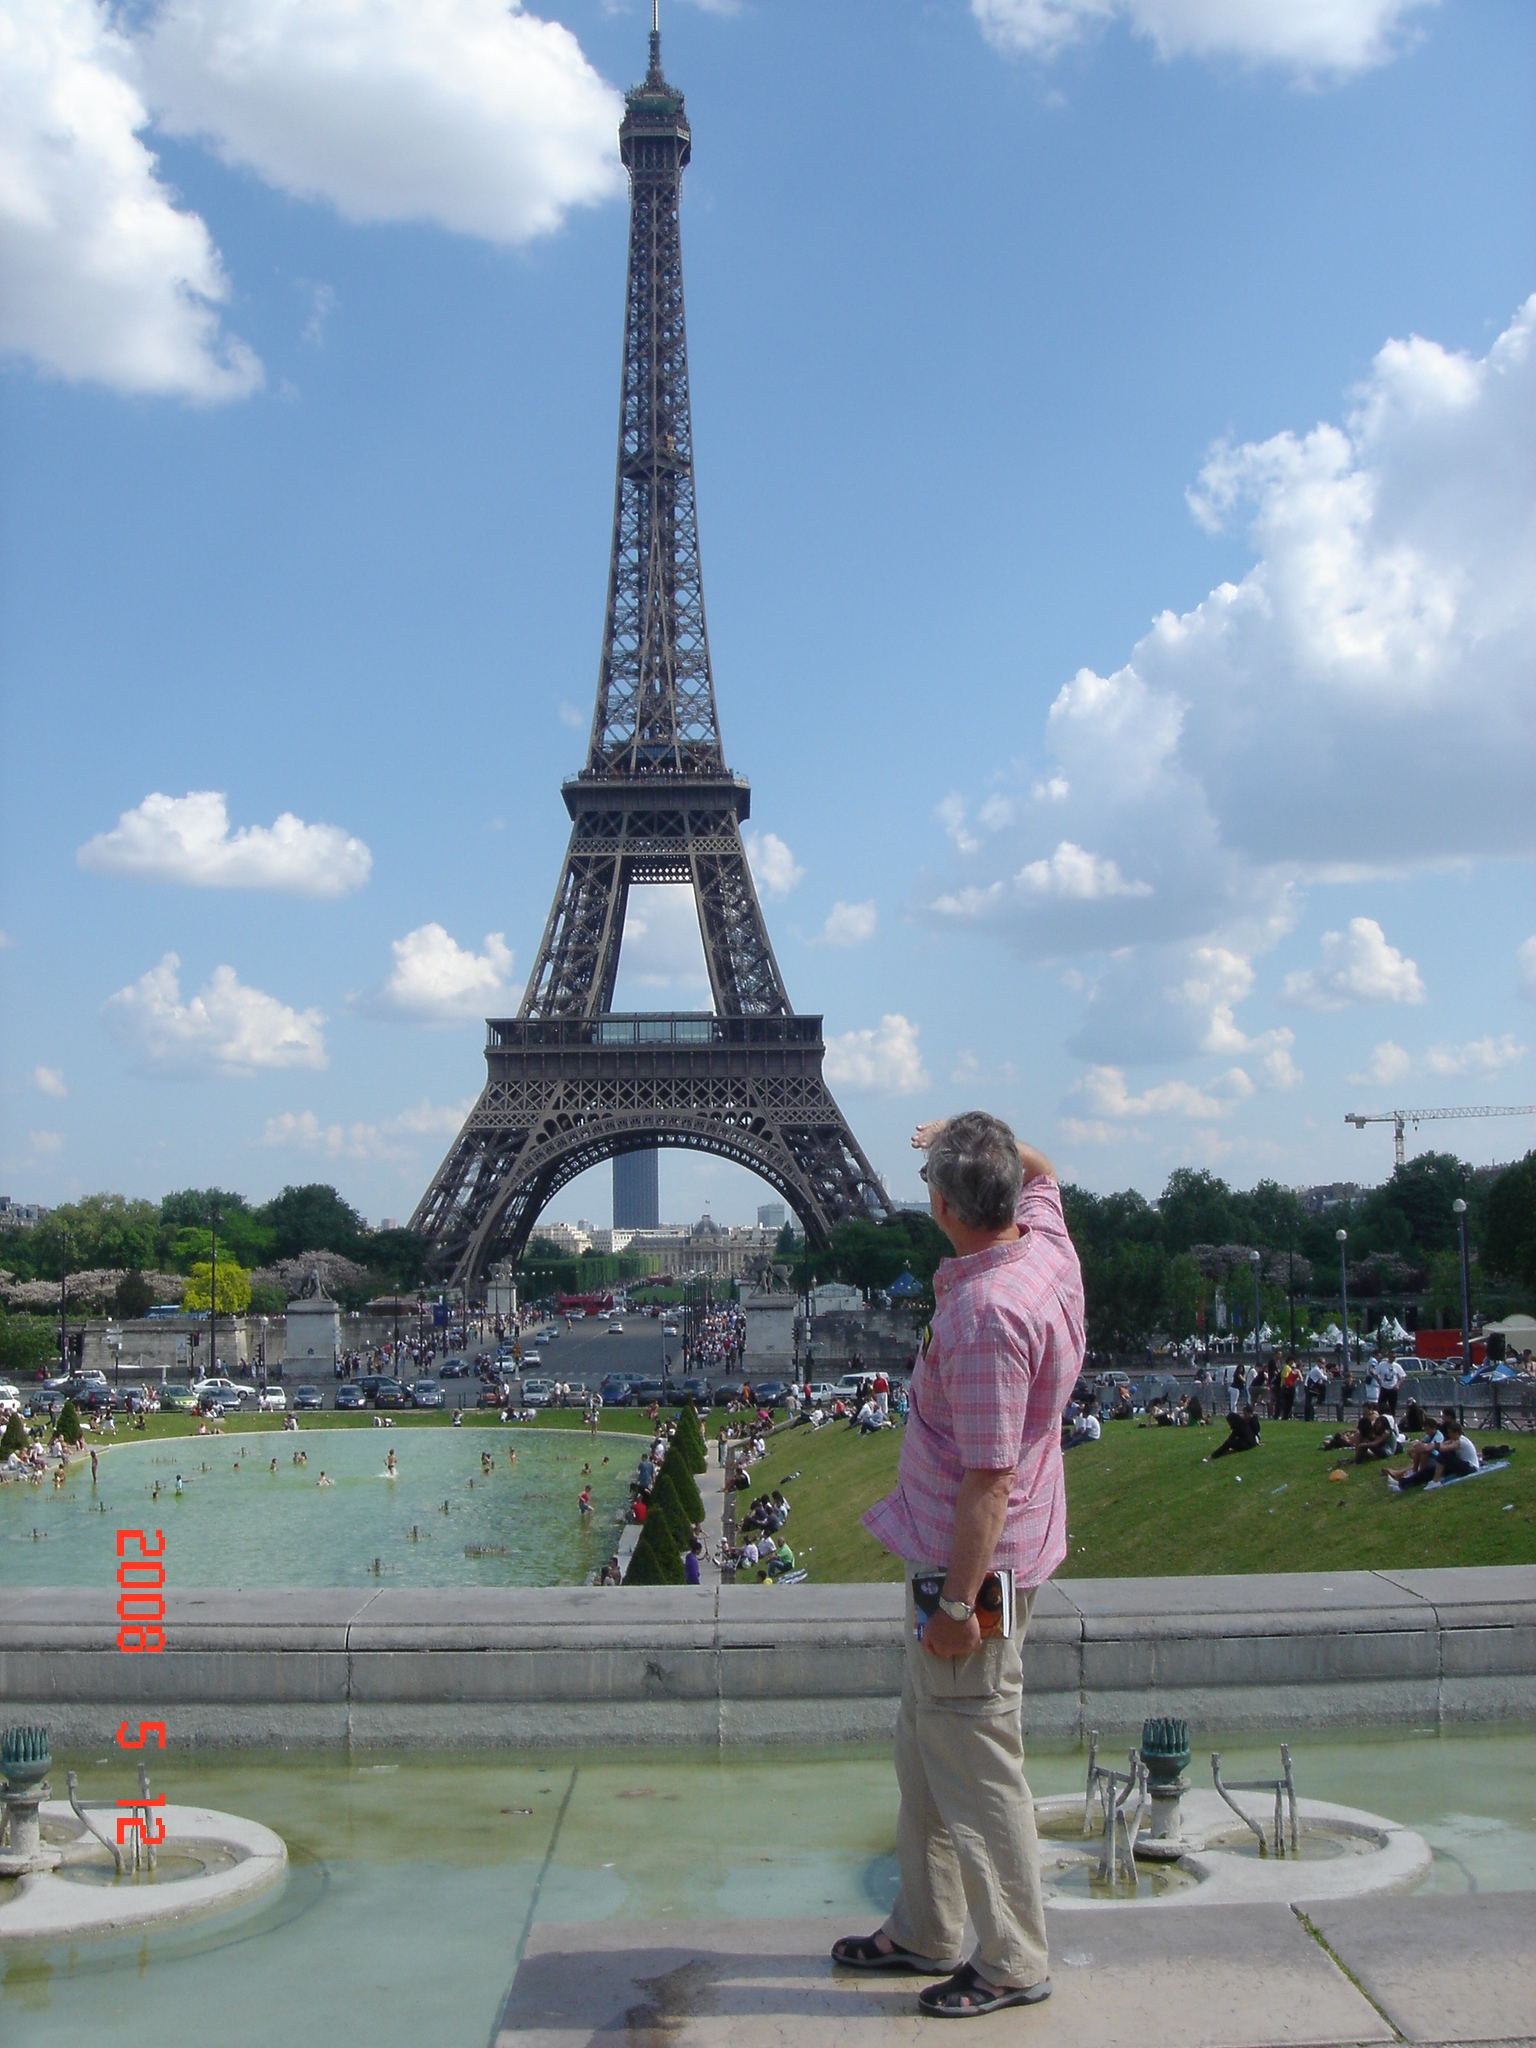 TRAVEL MEMEORIES OF THE TROCADERO AND EIFFEL TOWER 